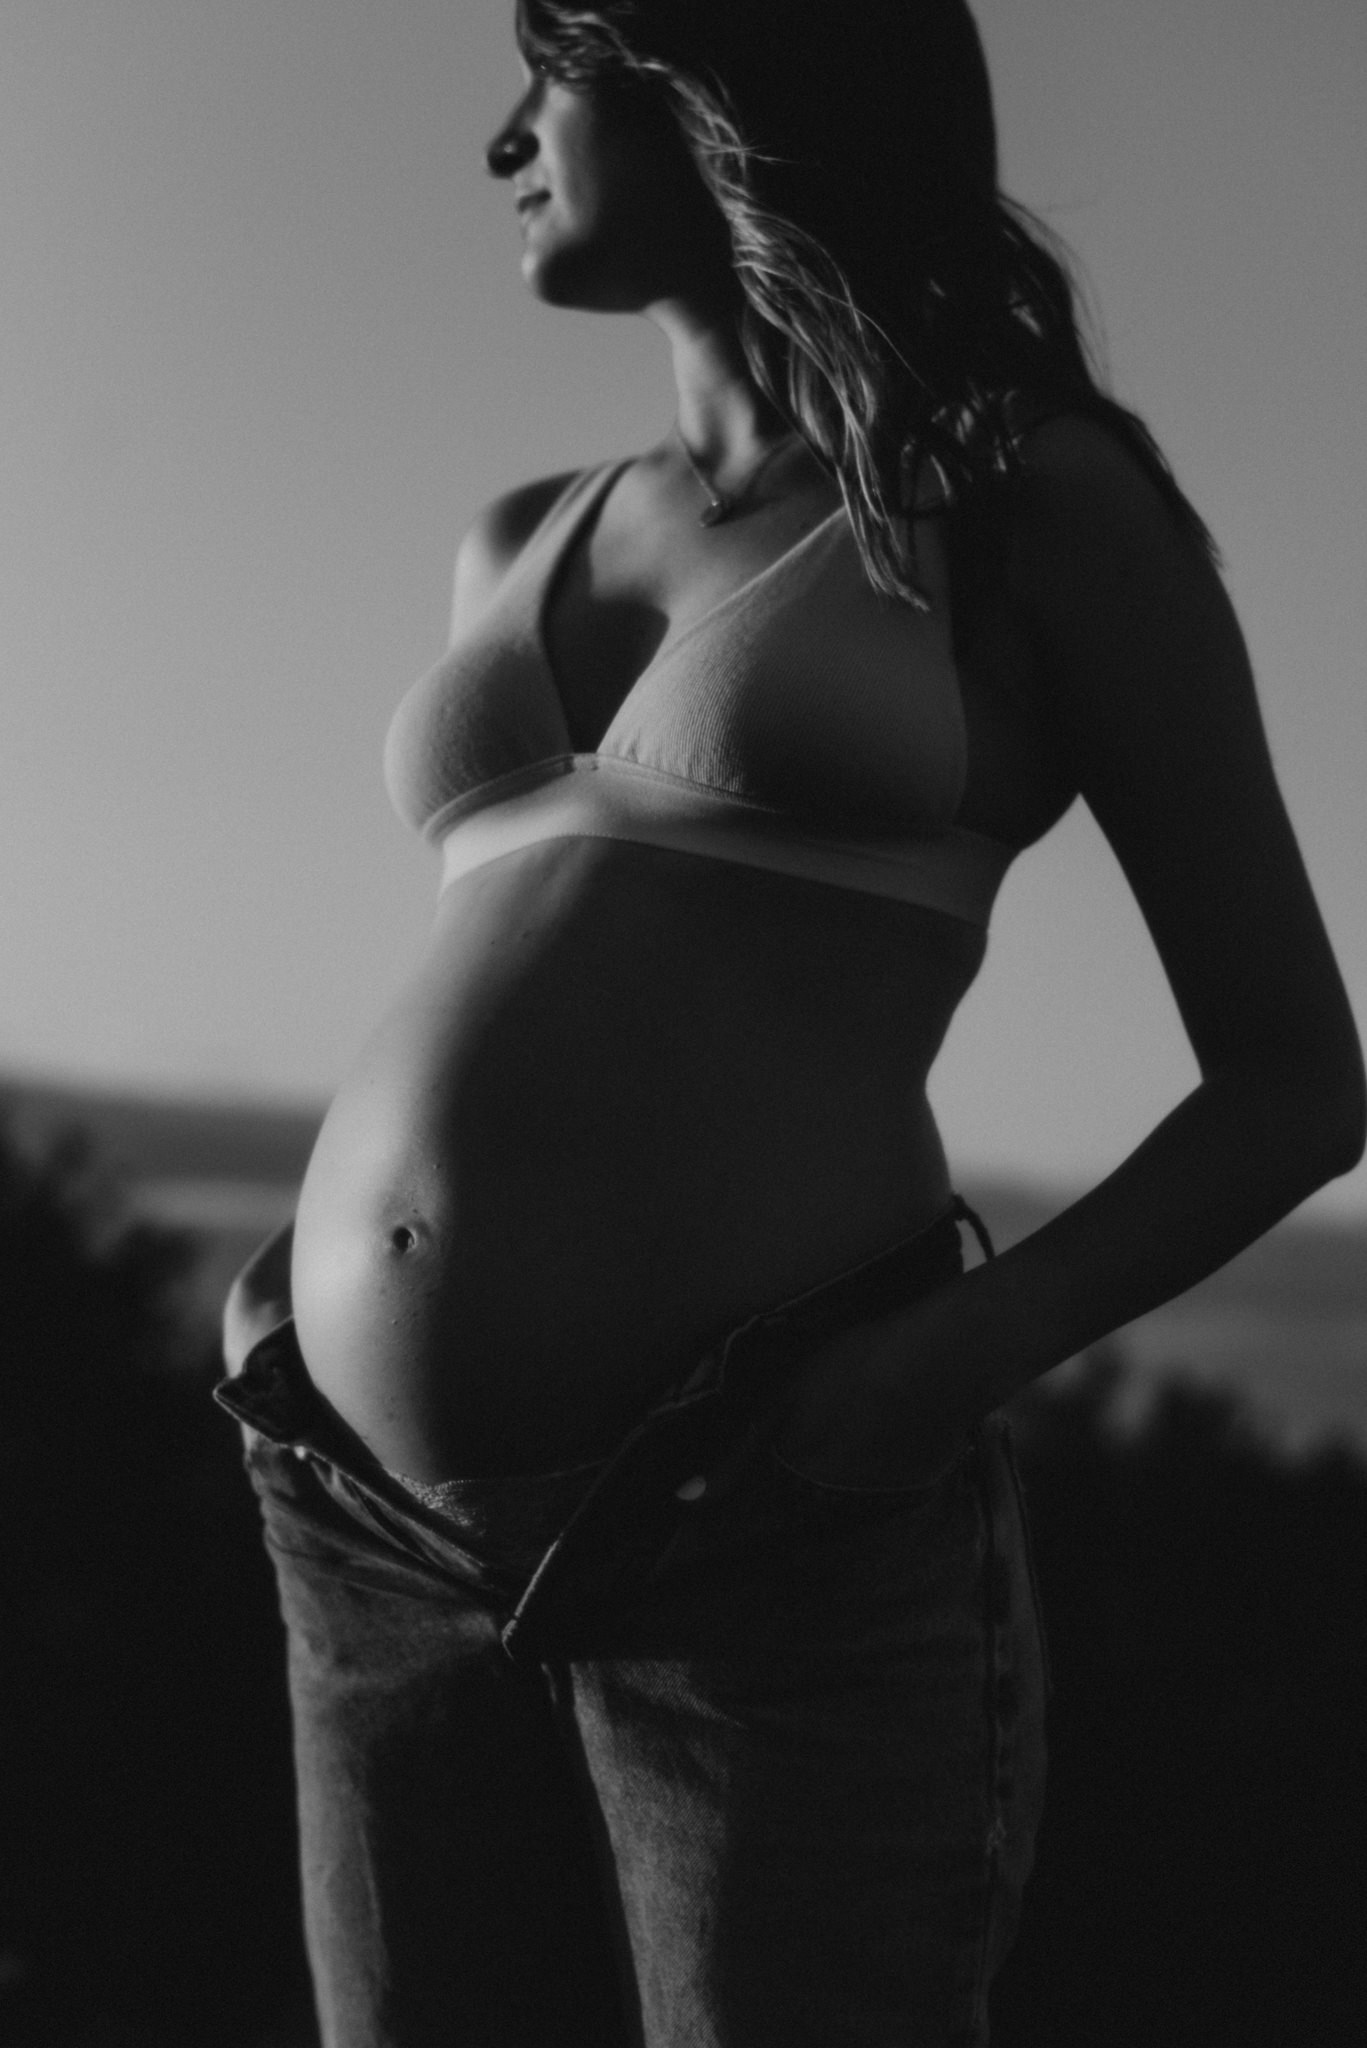 bra and jeans maternity photo in a field